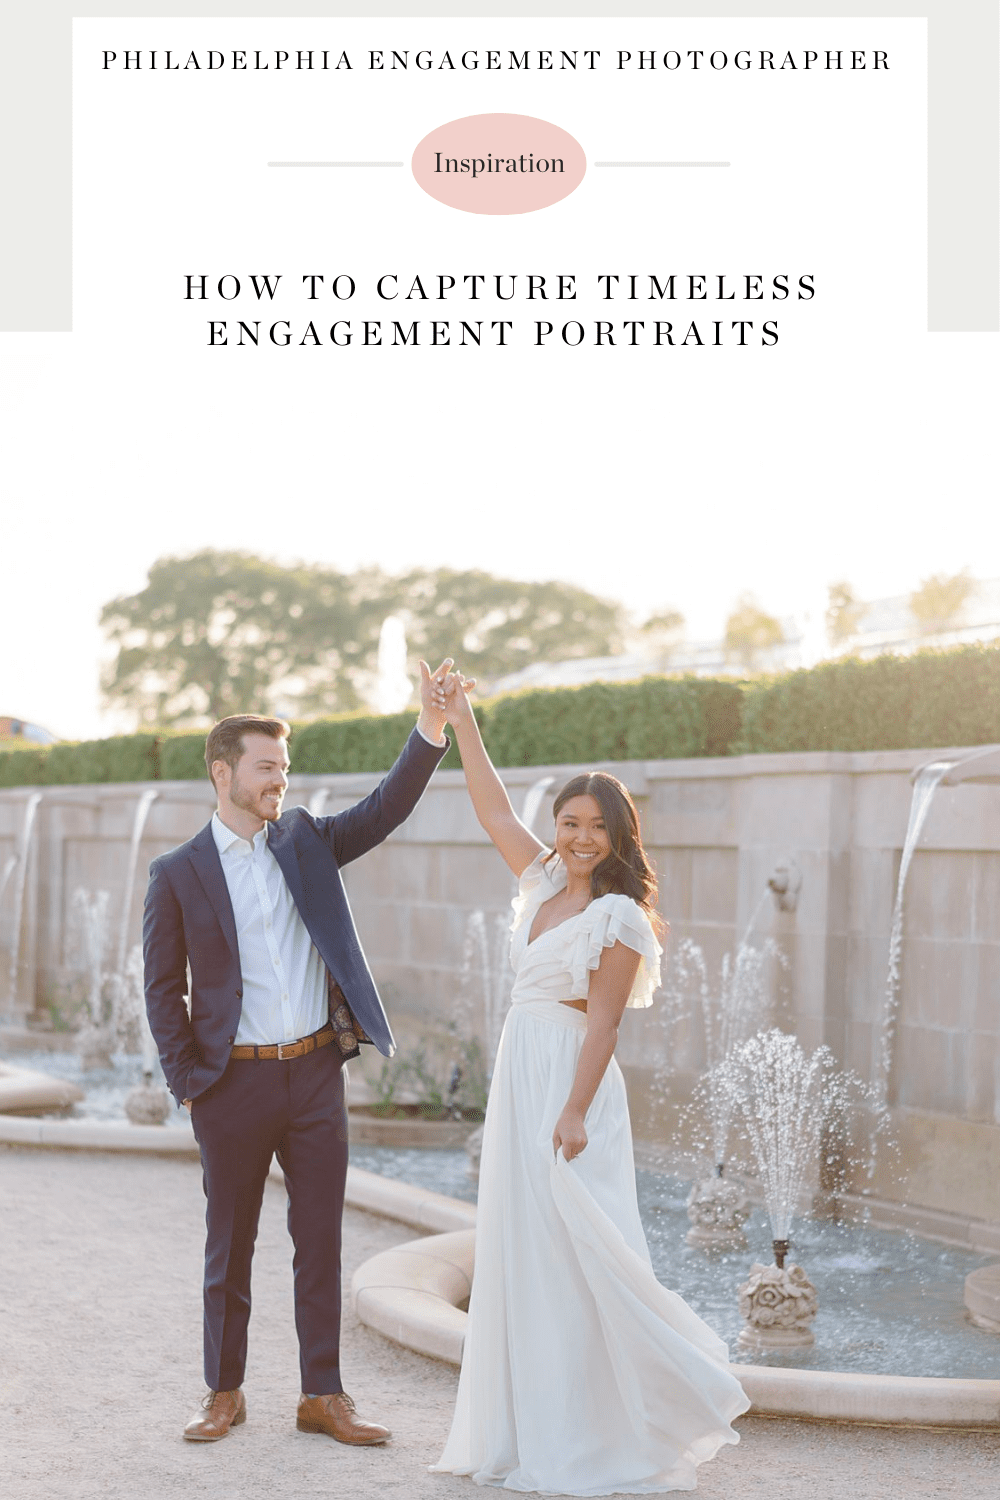 Philadelphia engagement photographer Amber Dawn photography shares 8 tips to Capture Timeless Engagement Photos and Avoid Cheesy Images